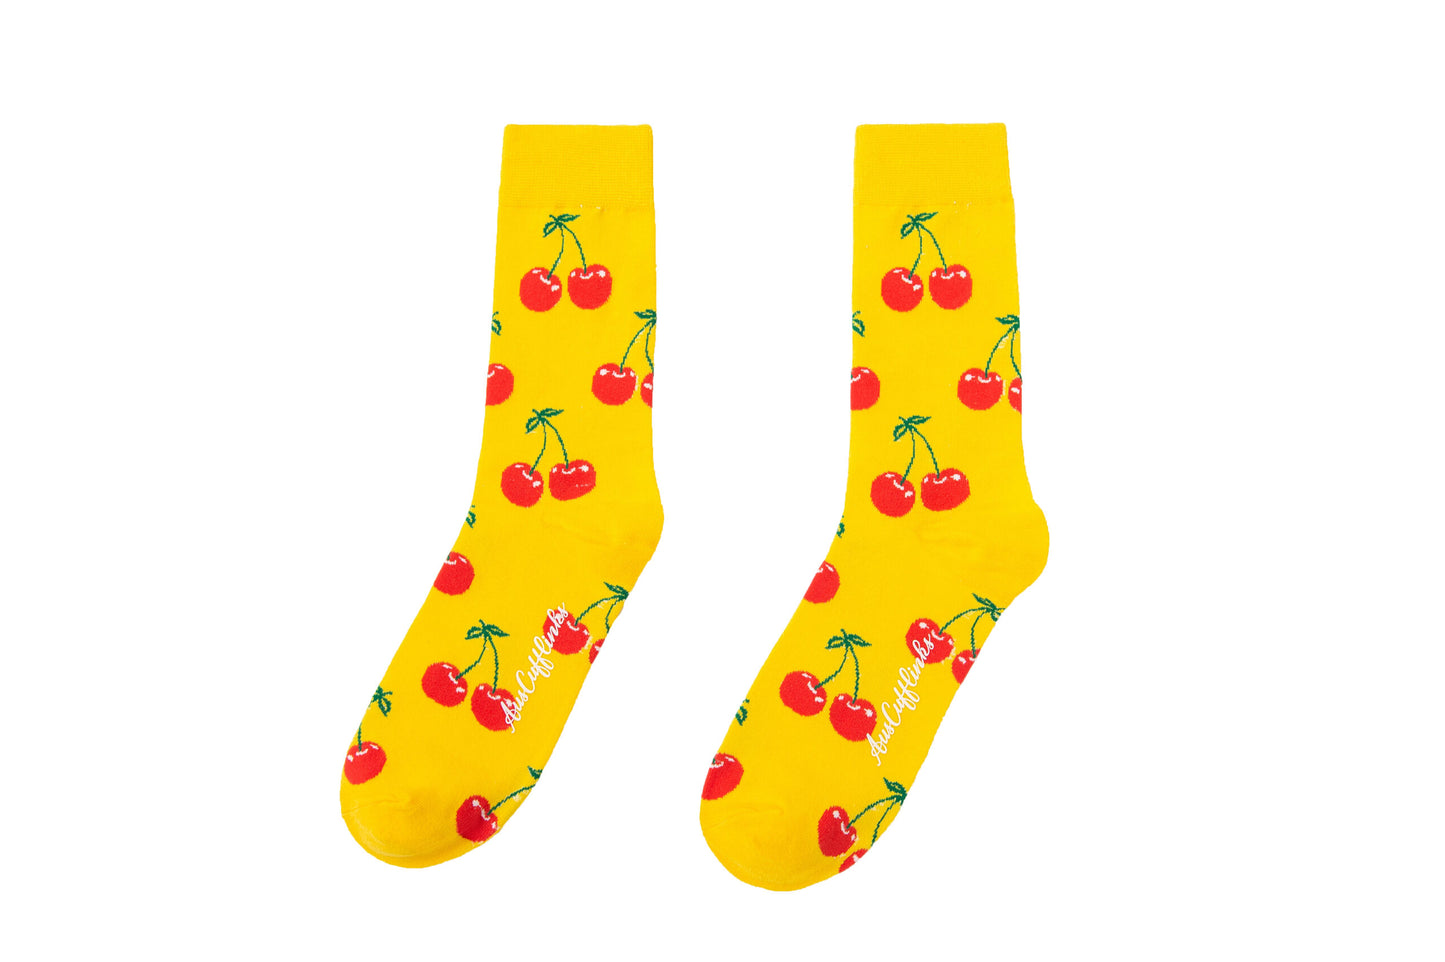 A pair of yellow Cherry Socks with red cherries on them.